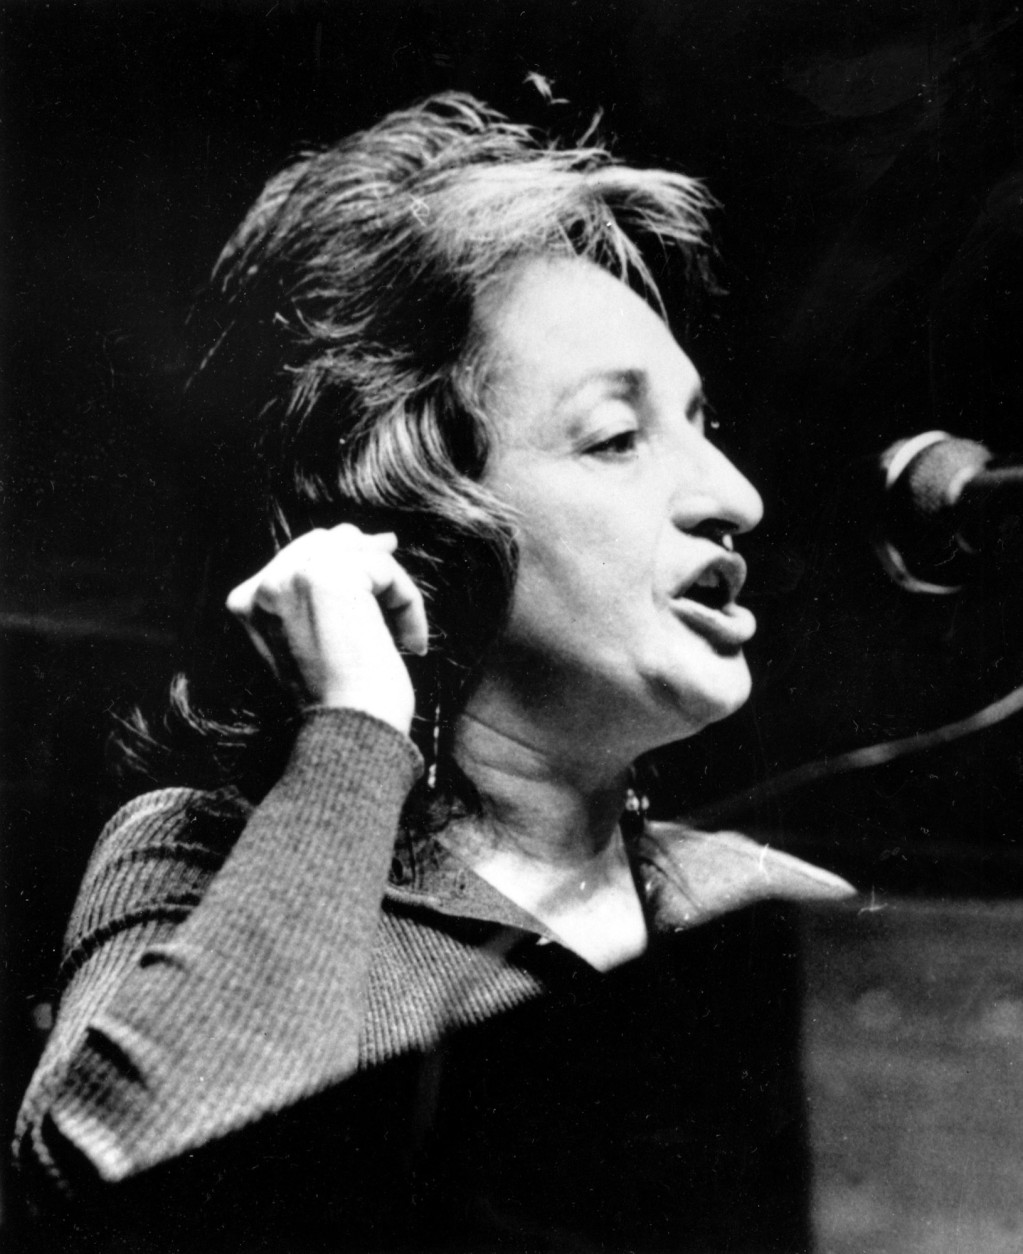 Women's rights activist Betty Friedan addresses a conference on "Women: A Political Force" at the State Assembly chamber in Albany, N.Y. on Nov. 13, 1971. The two-day conference was called by the women's unit of the governor's office to stimulate and unite New York State women to increase the effectiveness of their political power. (AP Photo)